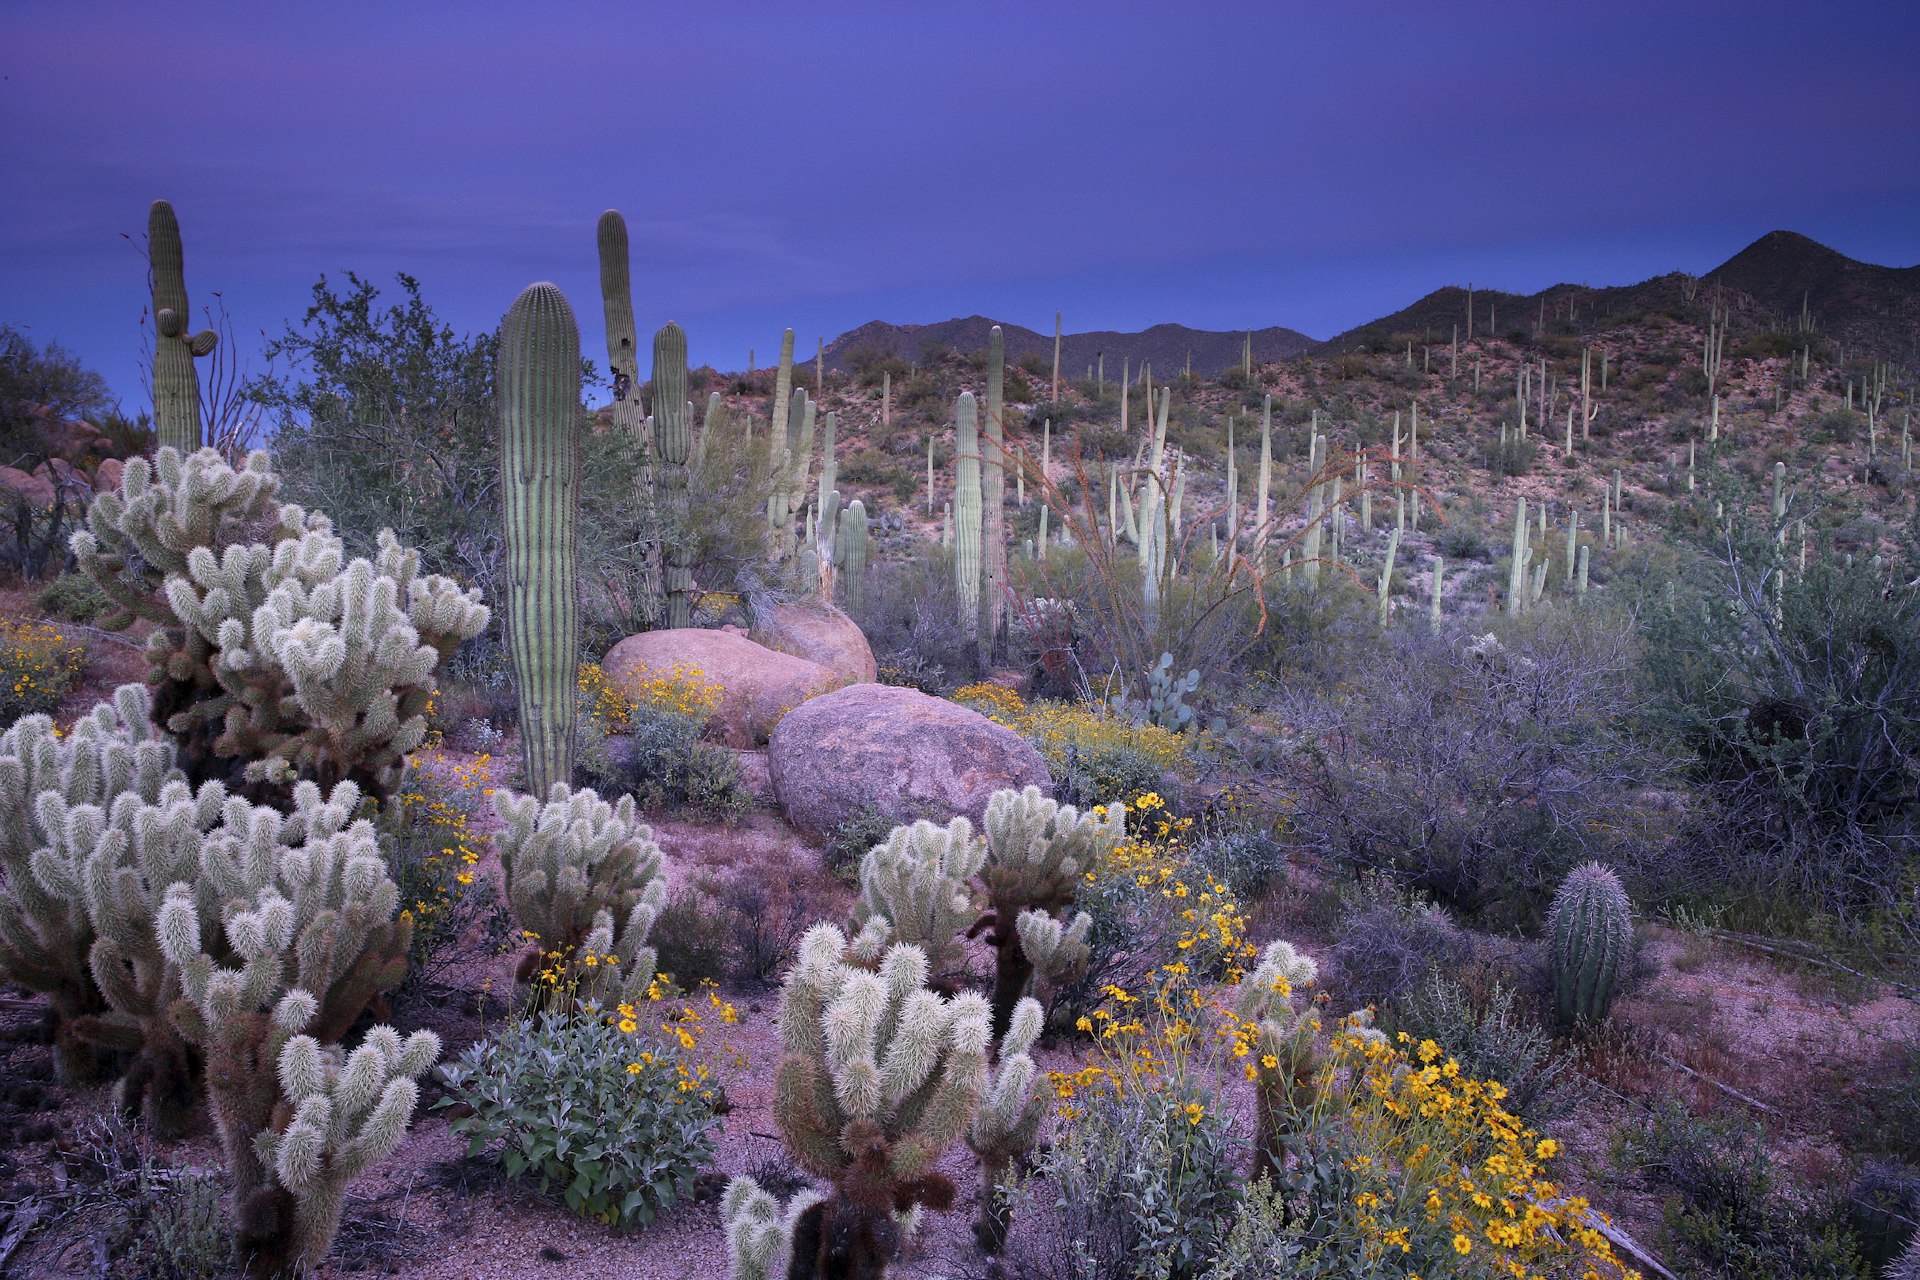 A desert garden made up of different types of cacti; the light is low and there's a purple haze over everything